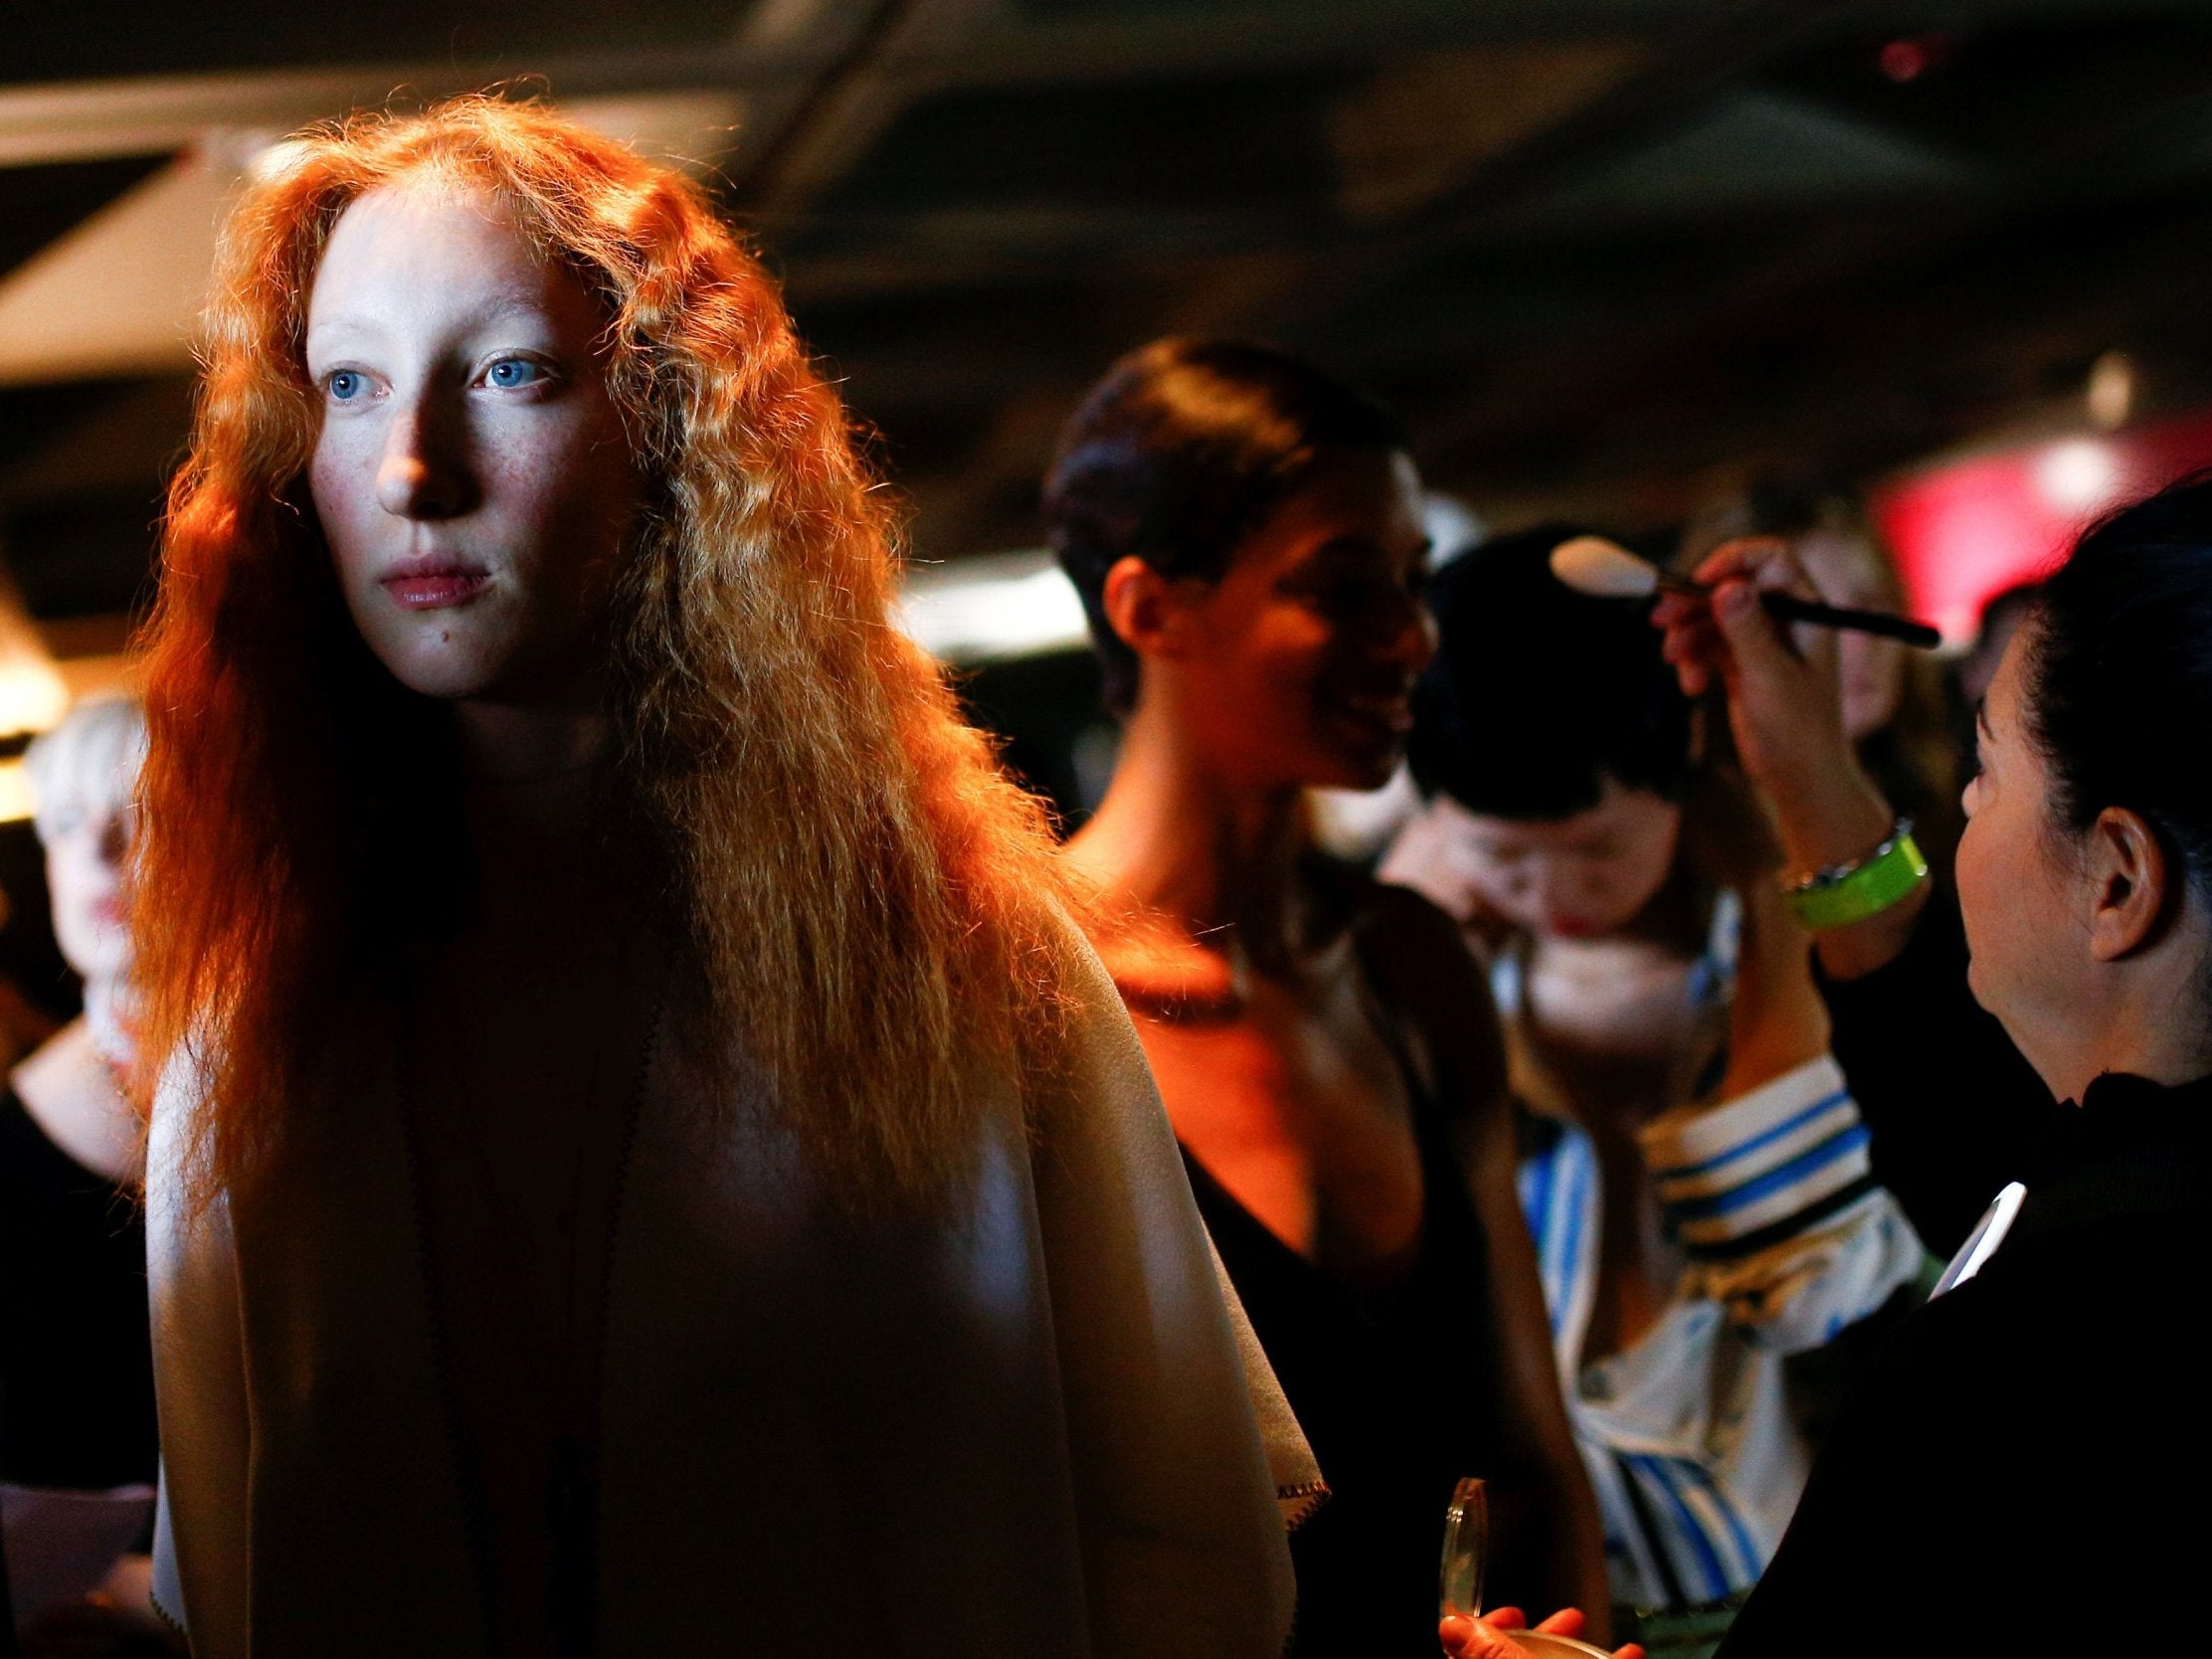 Models prepare backstage of the Roland Mouret catwalk show at the National Theatre